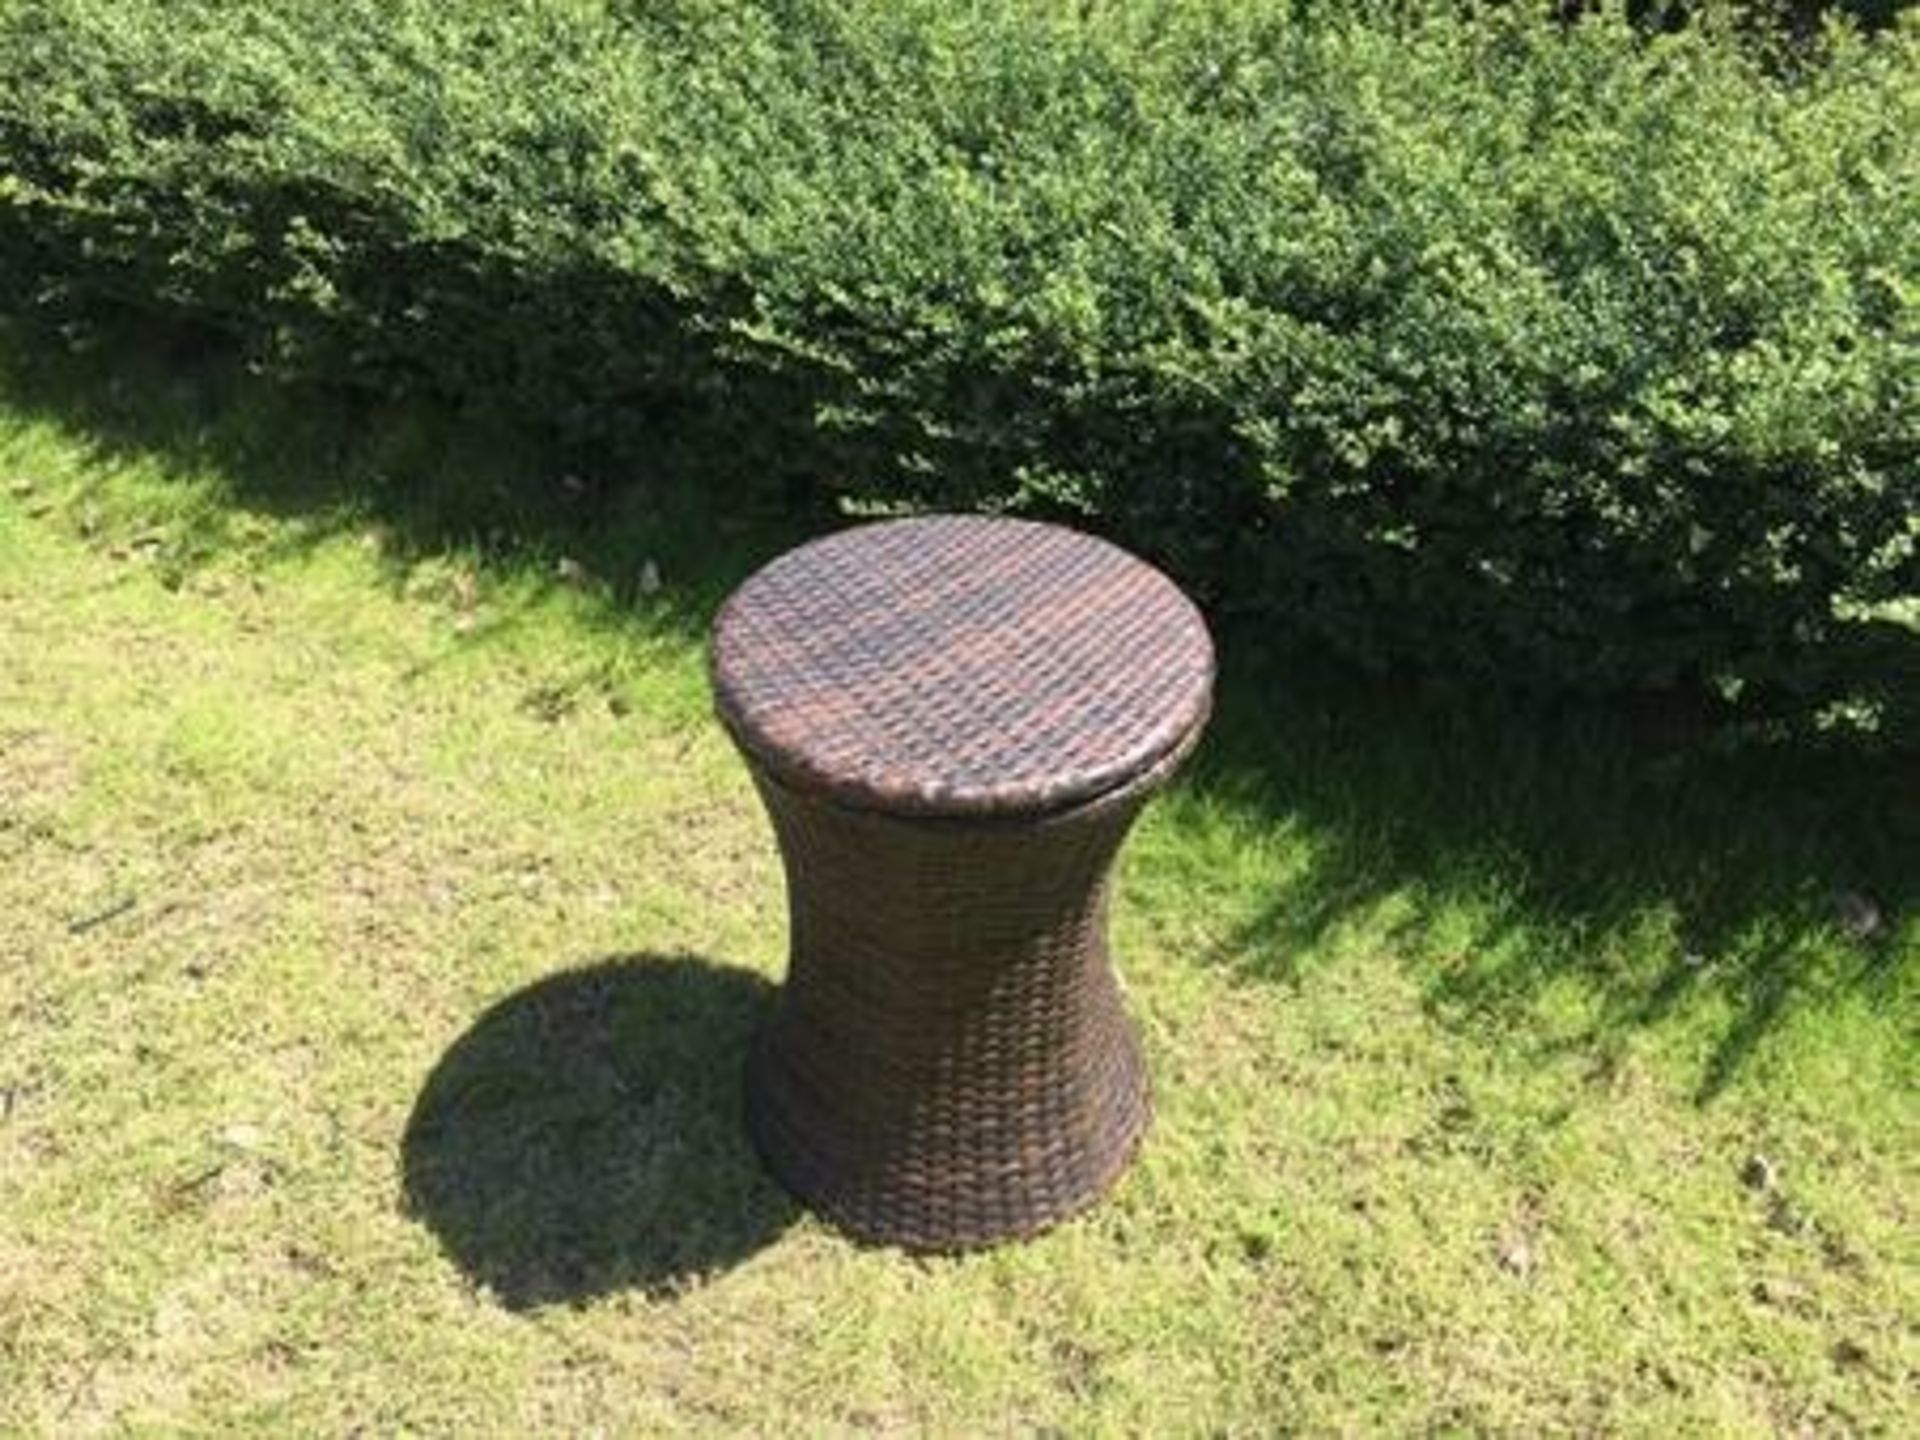 + VAT Brand New Chelsea Garden Company Rattan Bar Table With Metal Ice Cooler - Finished In